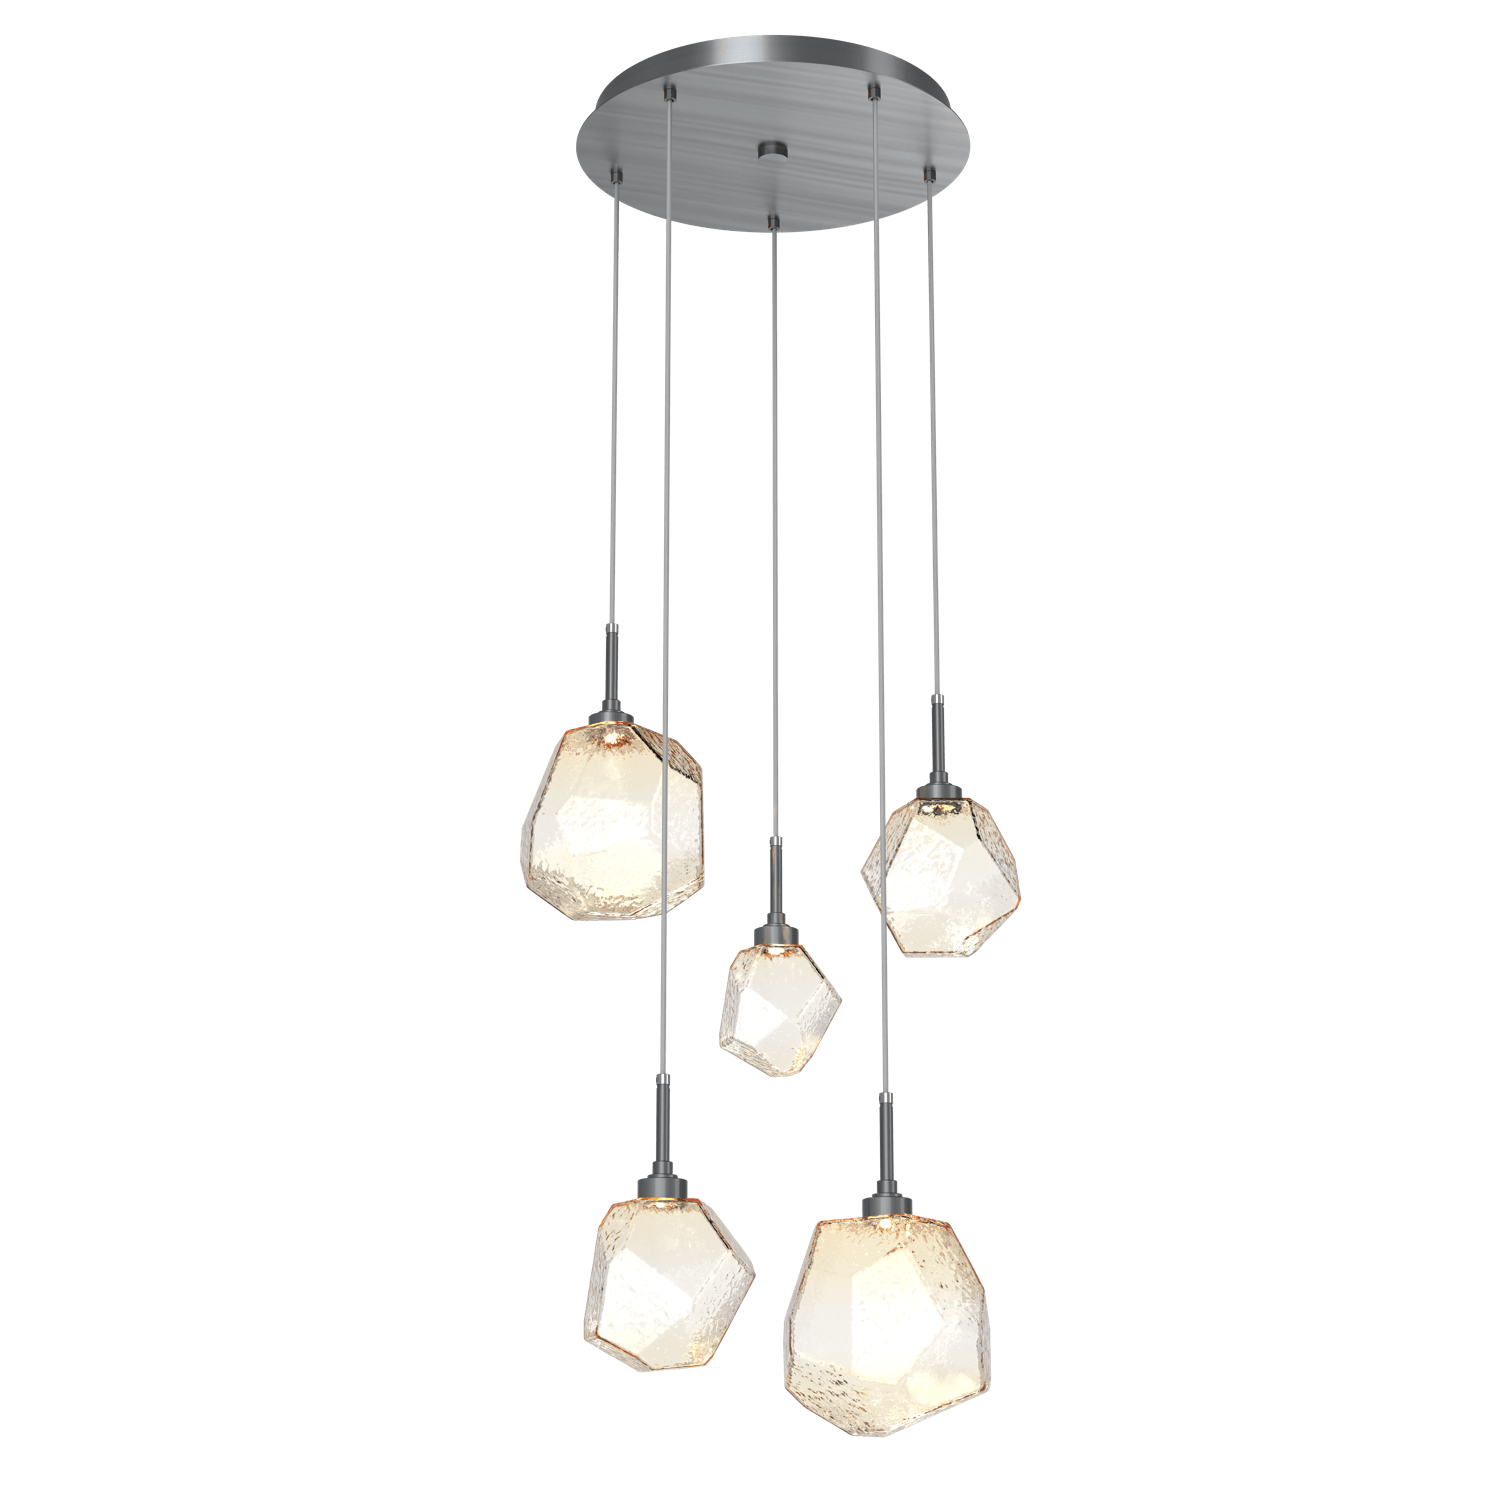 CHB0039-05-GM-A-Hammerton-Studio-Gem-5-light-round-pendant-chandelier-with-gunmetal-finish-and-amber-blown-glass-shades-and-LED-lamping